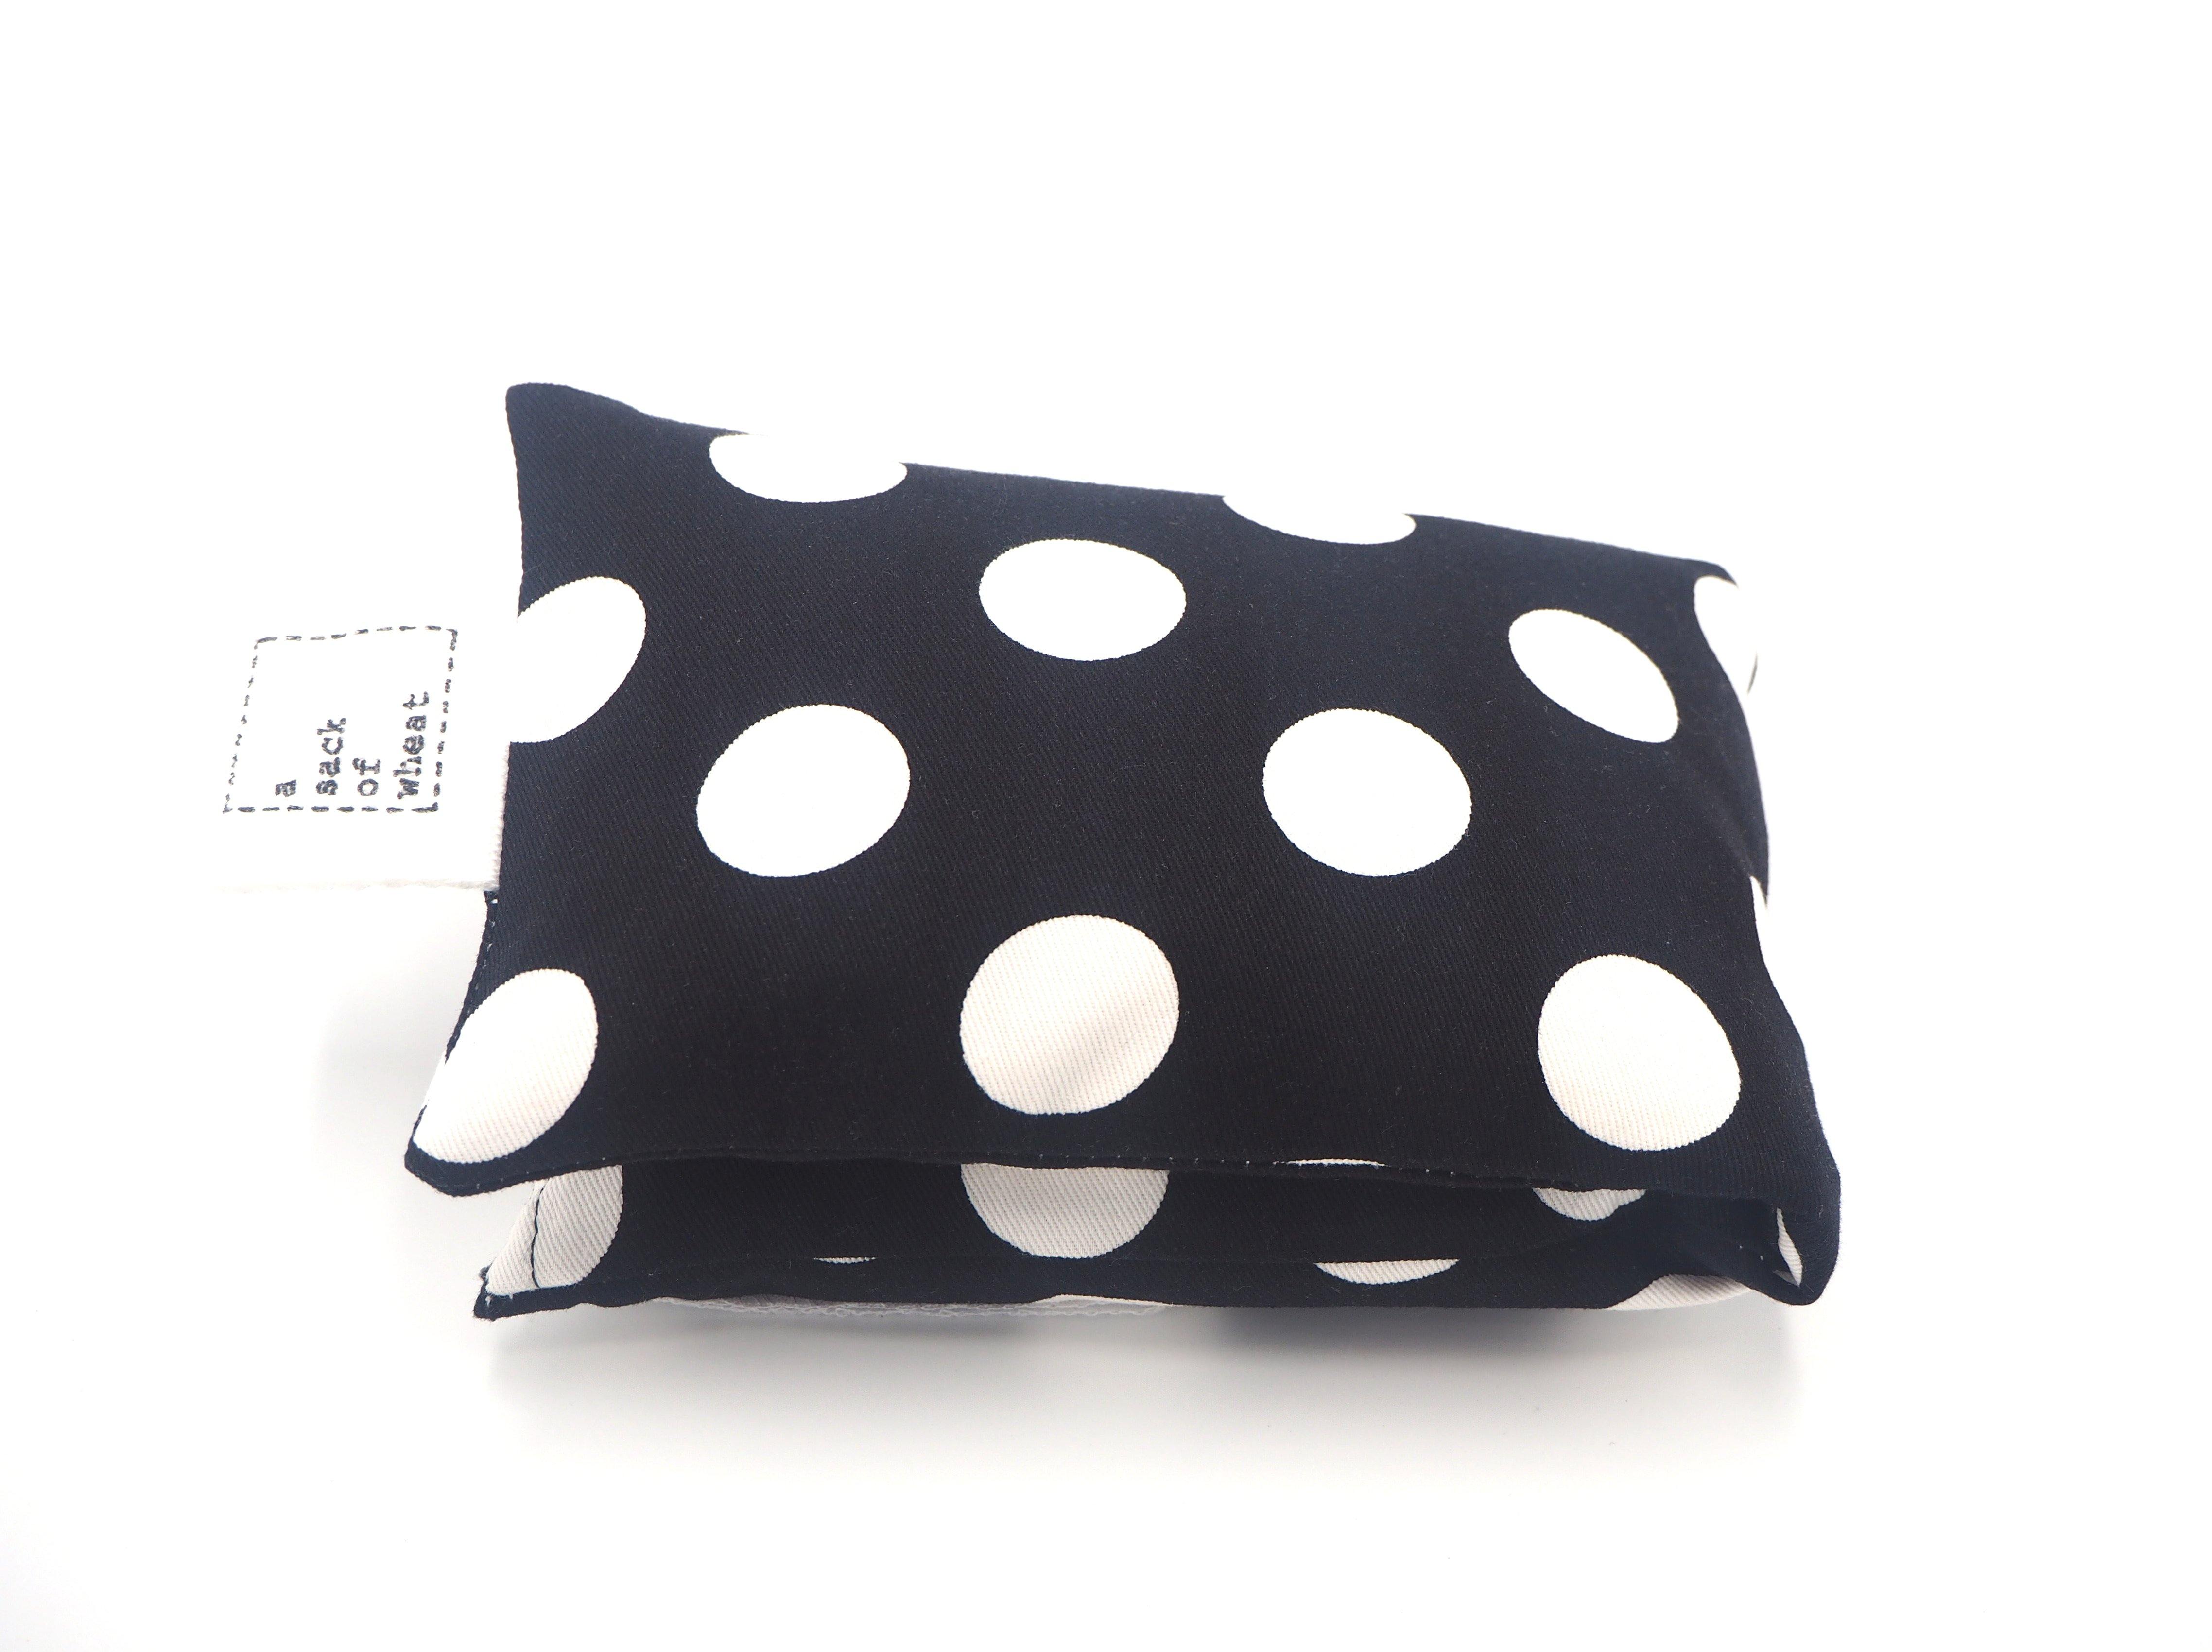 Folded view of A Sack Of Wheat, in a classic Black & White Polka Dot print, 100% cotton fabric